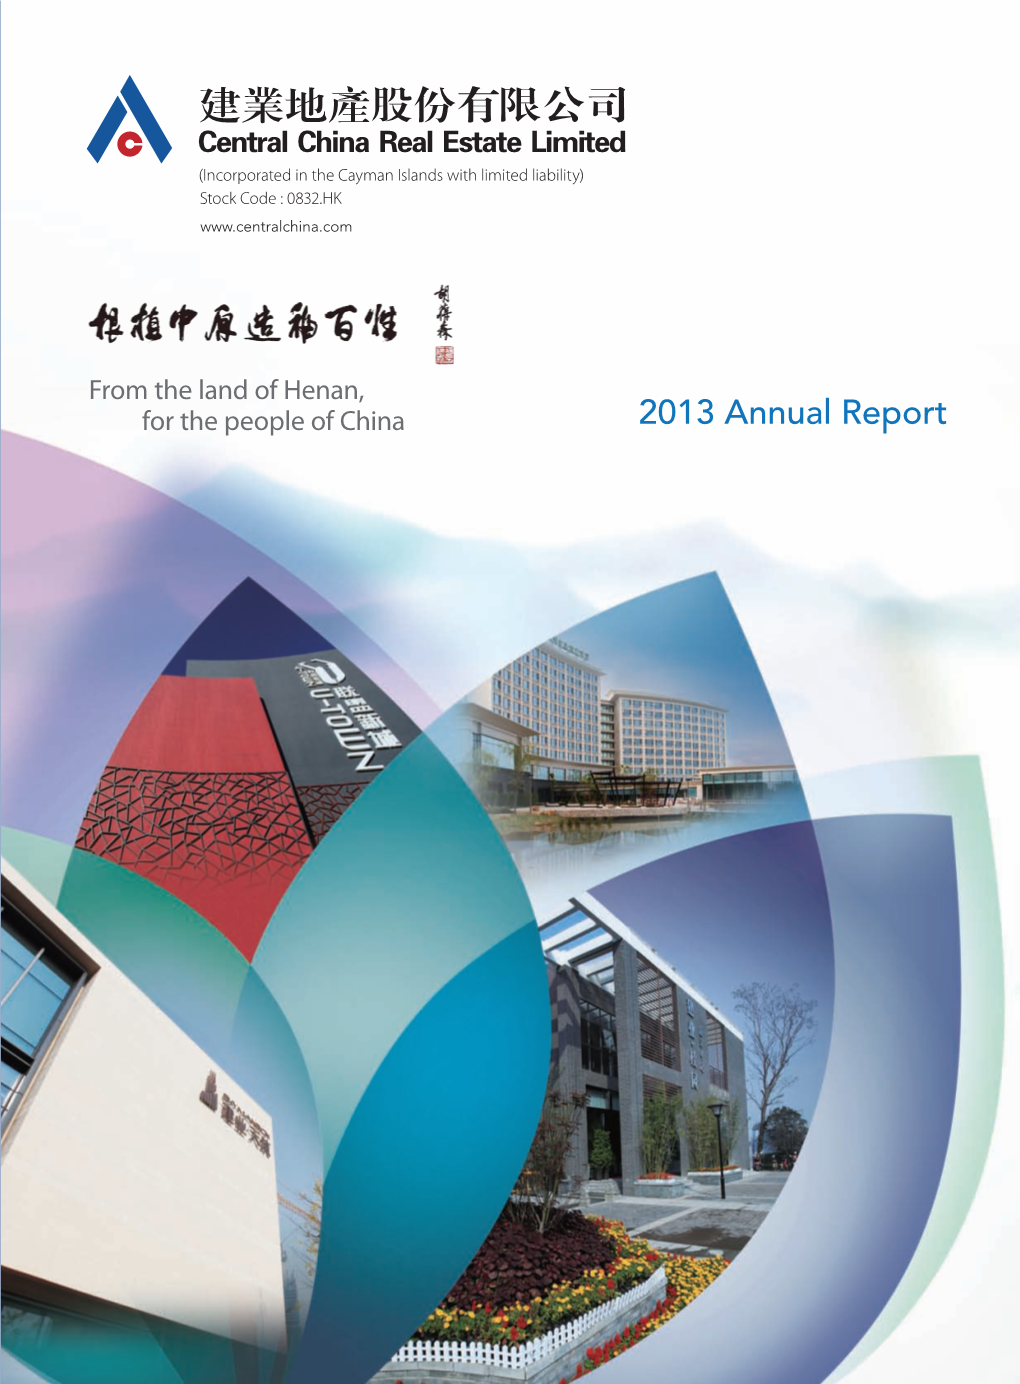 2013 Annual Report CONTENTS CORPORATE INFORMATION 2 CORPORATE PROFILE 4 CHAIRMAN’S STATEMENT 6 FINANCIAL HIGHLIGHTS 9 MANAGEMENT DISCUSSION and ANALYSIS 10 I